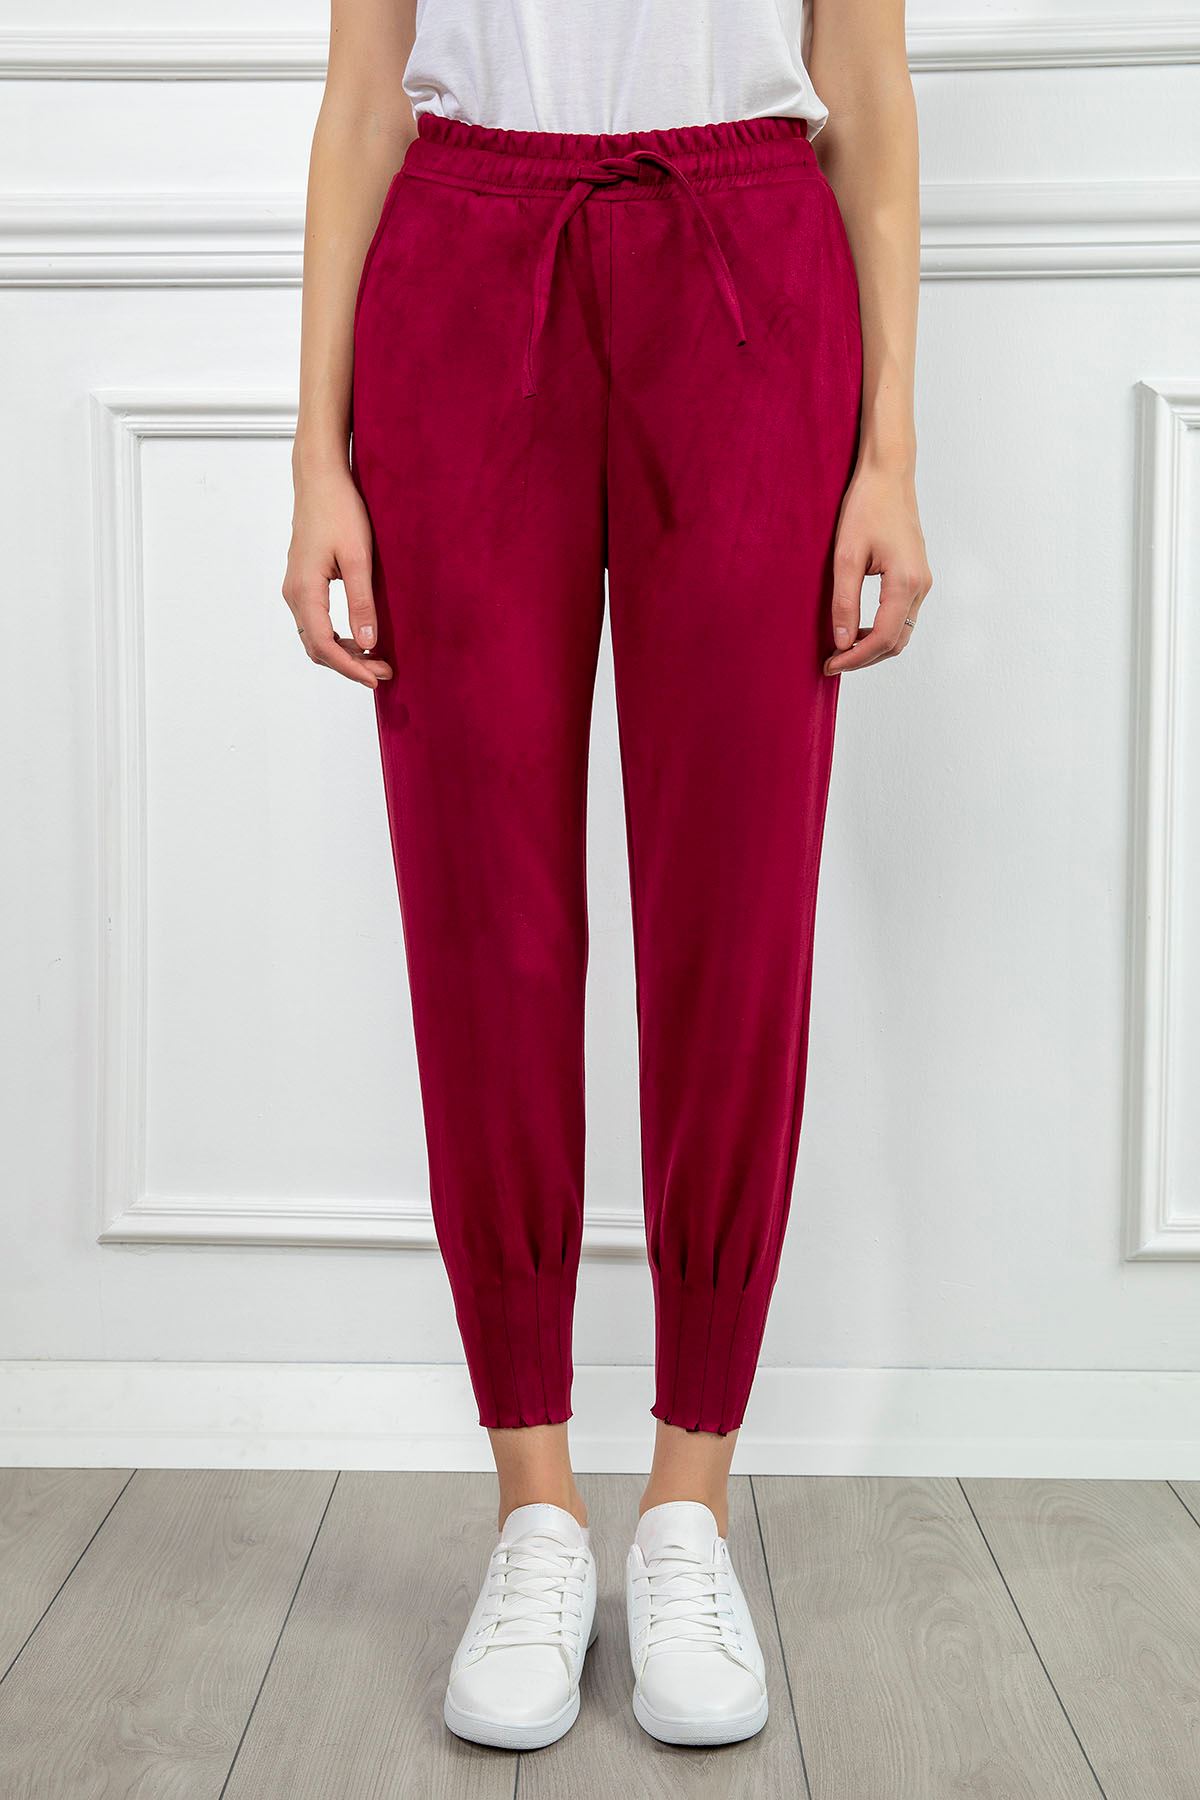 Suede Fabric Tight Fit Slited Women'S Trouser - Burgundy